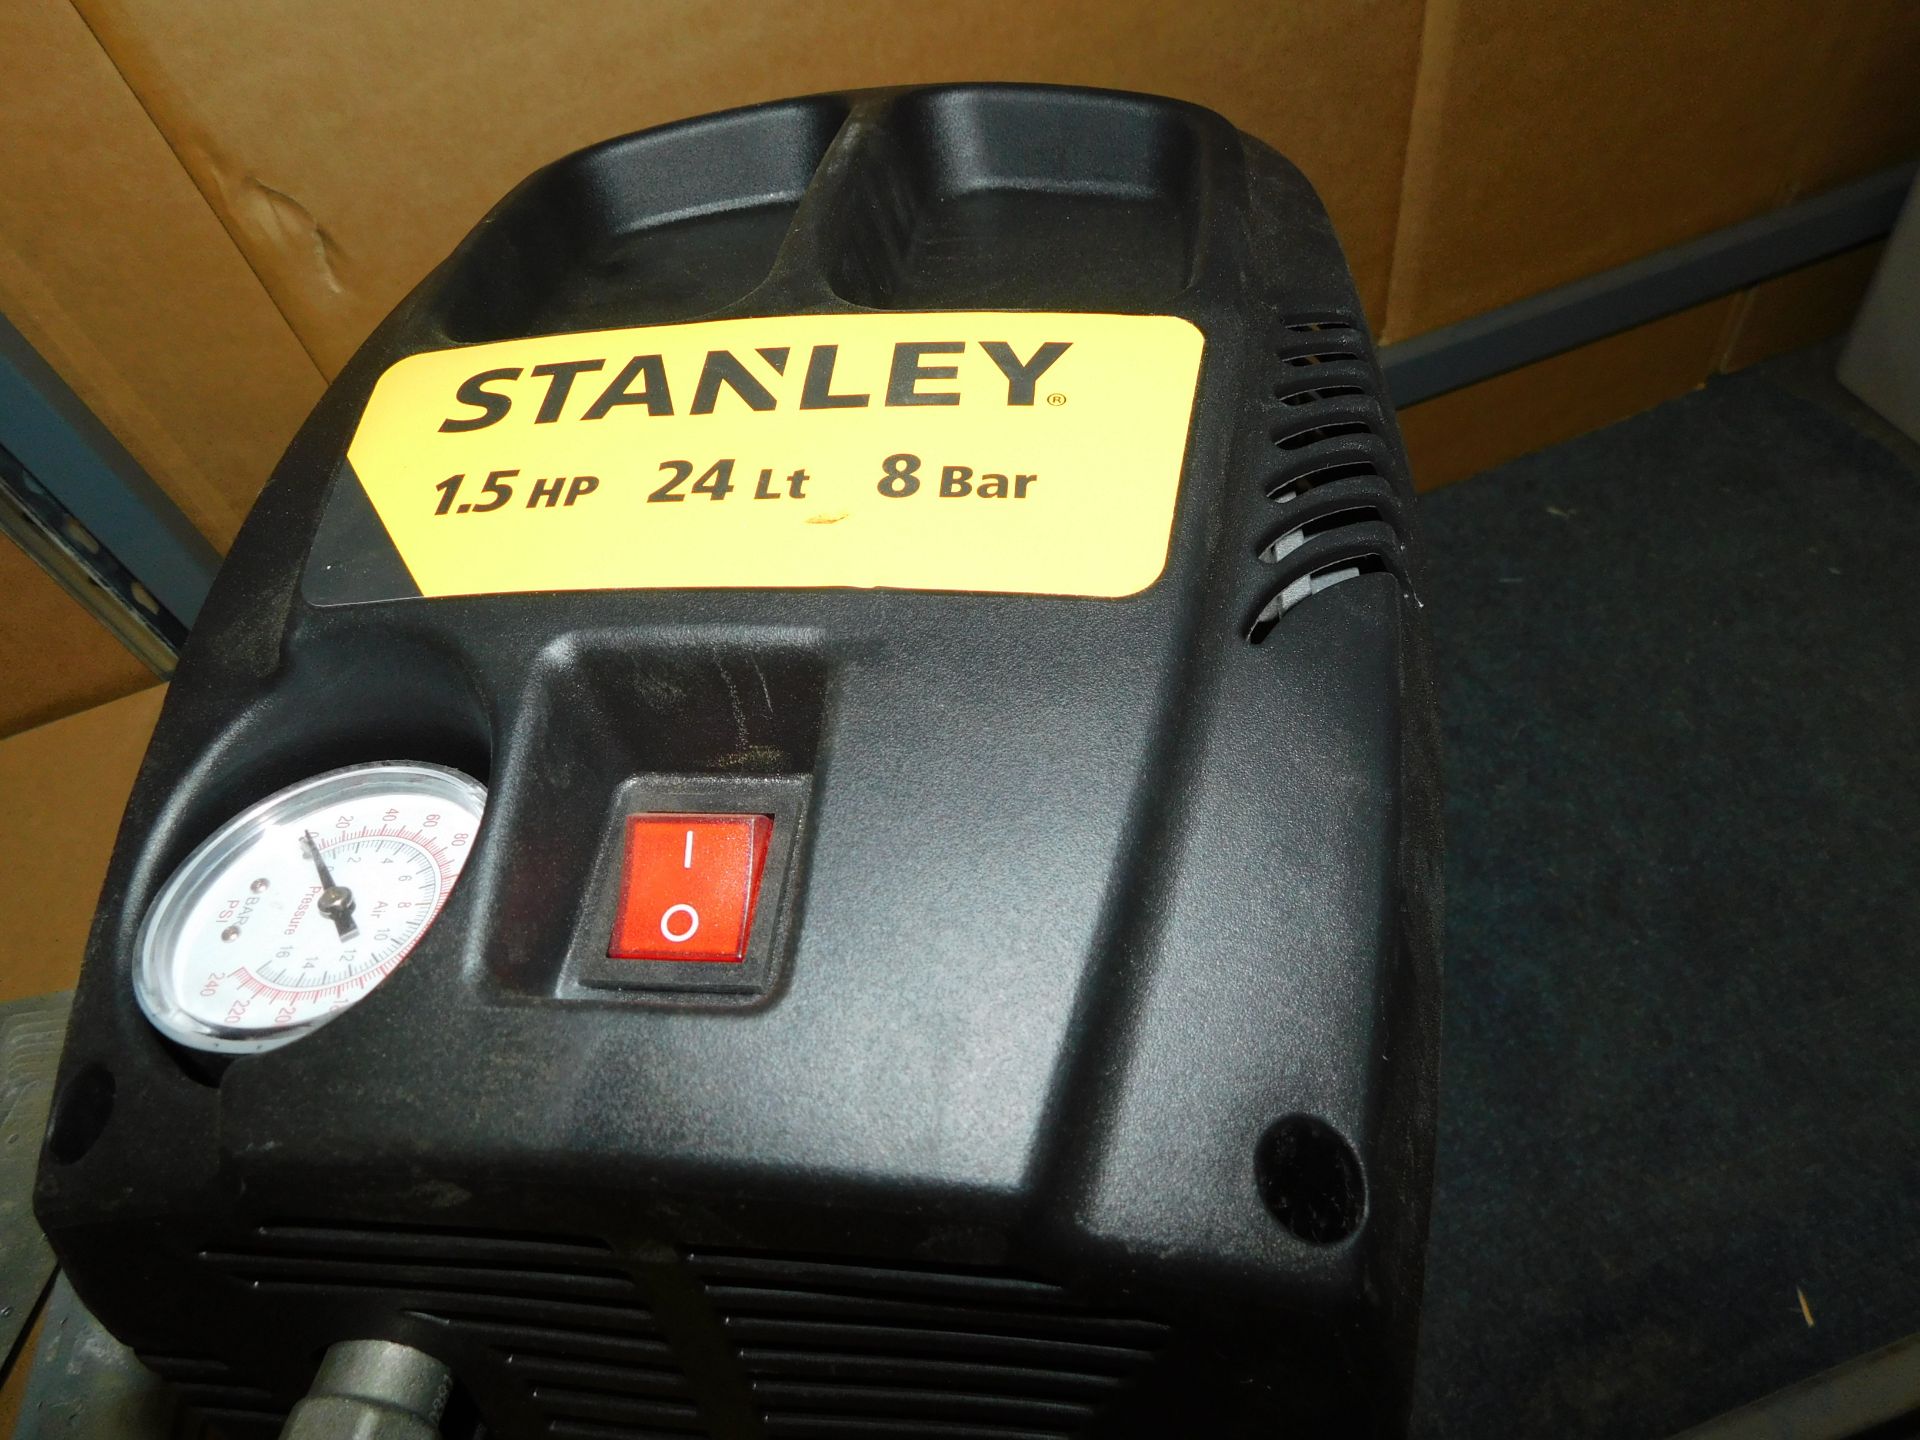 Stanley D200/8/24 Portable Compressor (Location Stockport. Please Refer to General Notes) - Image 3 of 3